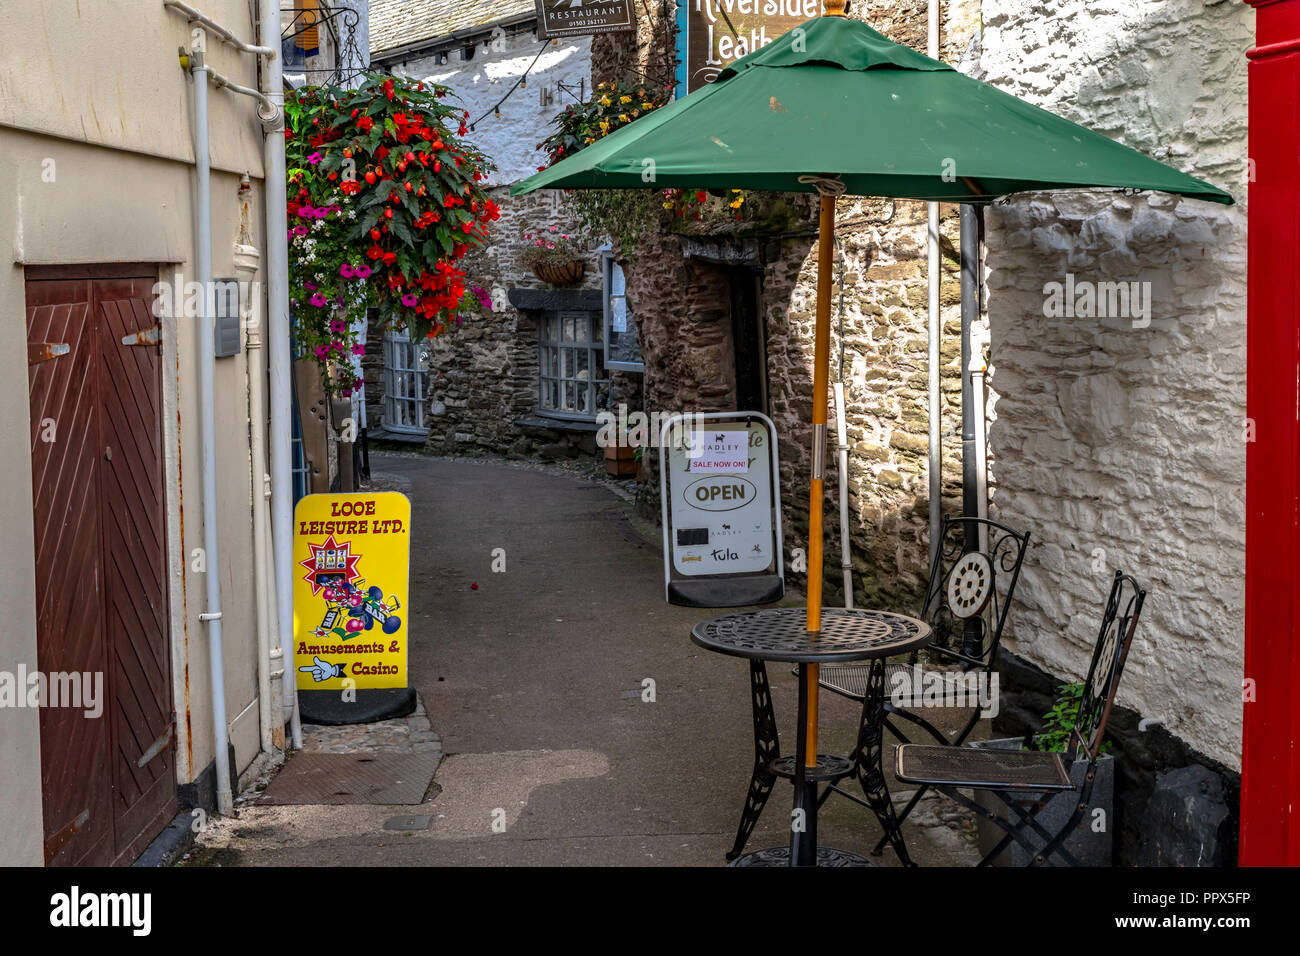 LOOE Cornwall England UK  Looe a very popular fishing port  a Holiday Resort full of Hotels, Attractions, and Restaurants. Stock Photo